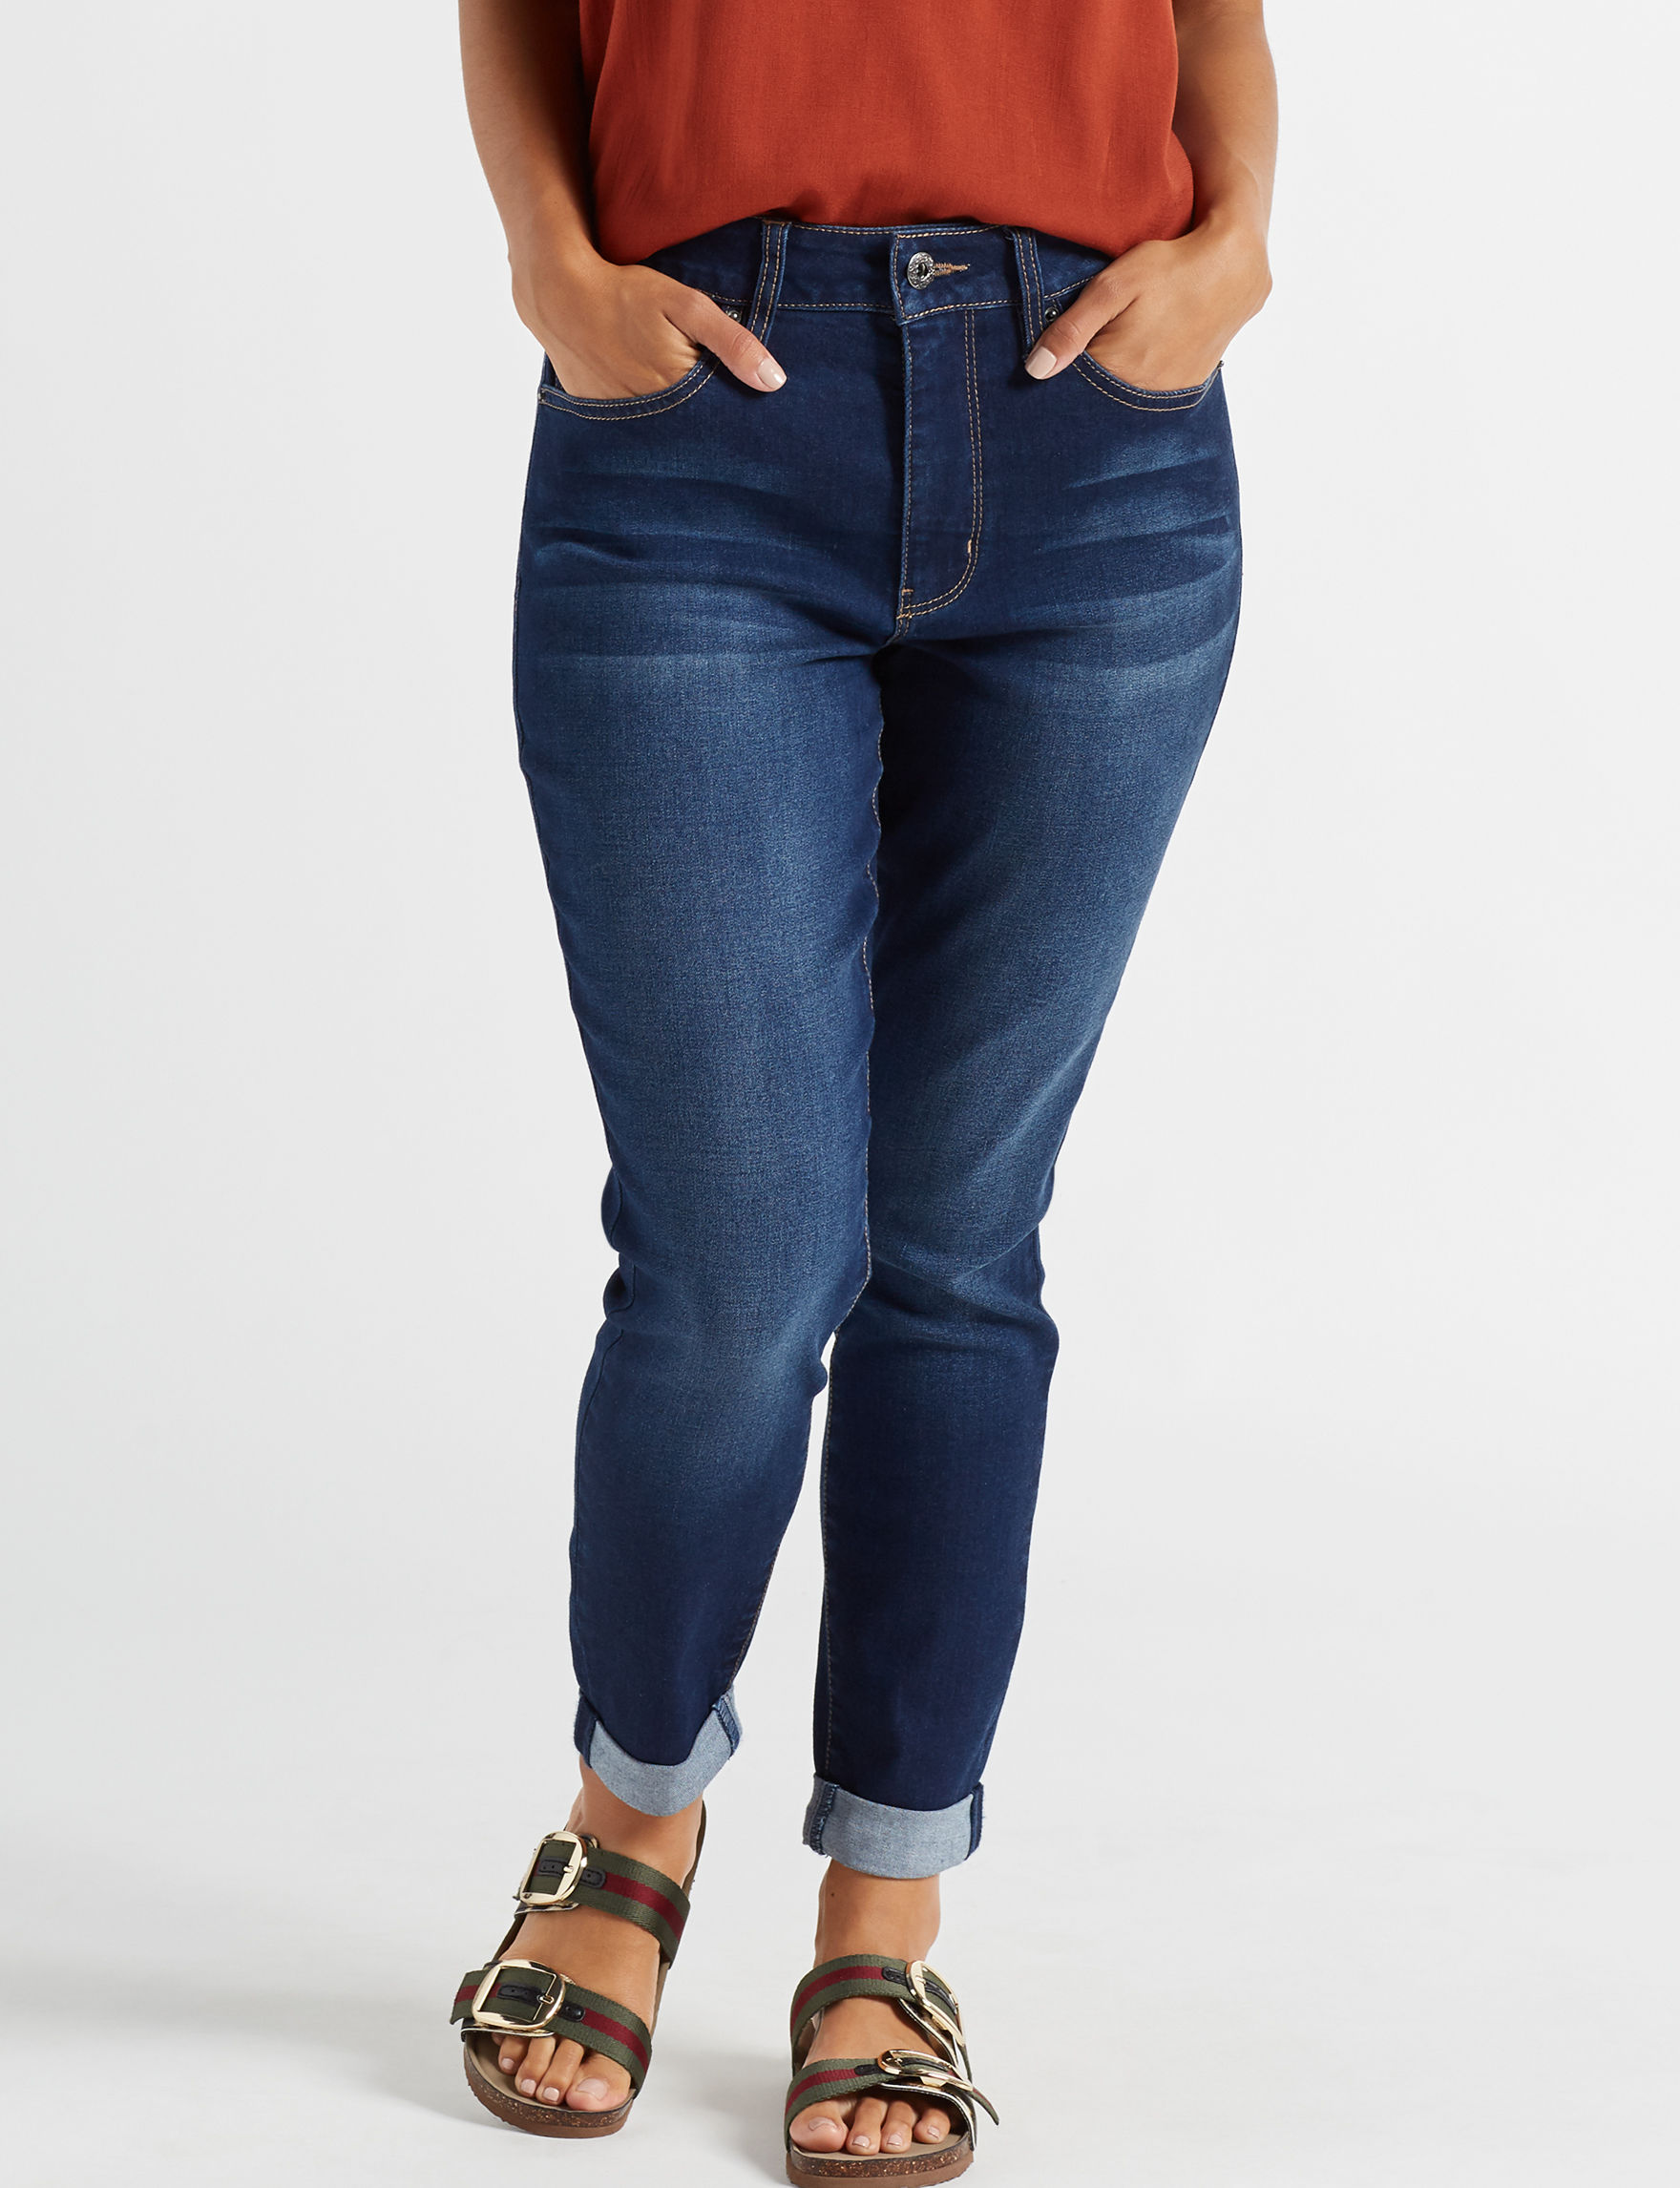 Signature Studio Women's Cuffed High Rise Jeans | Stage Stores